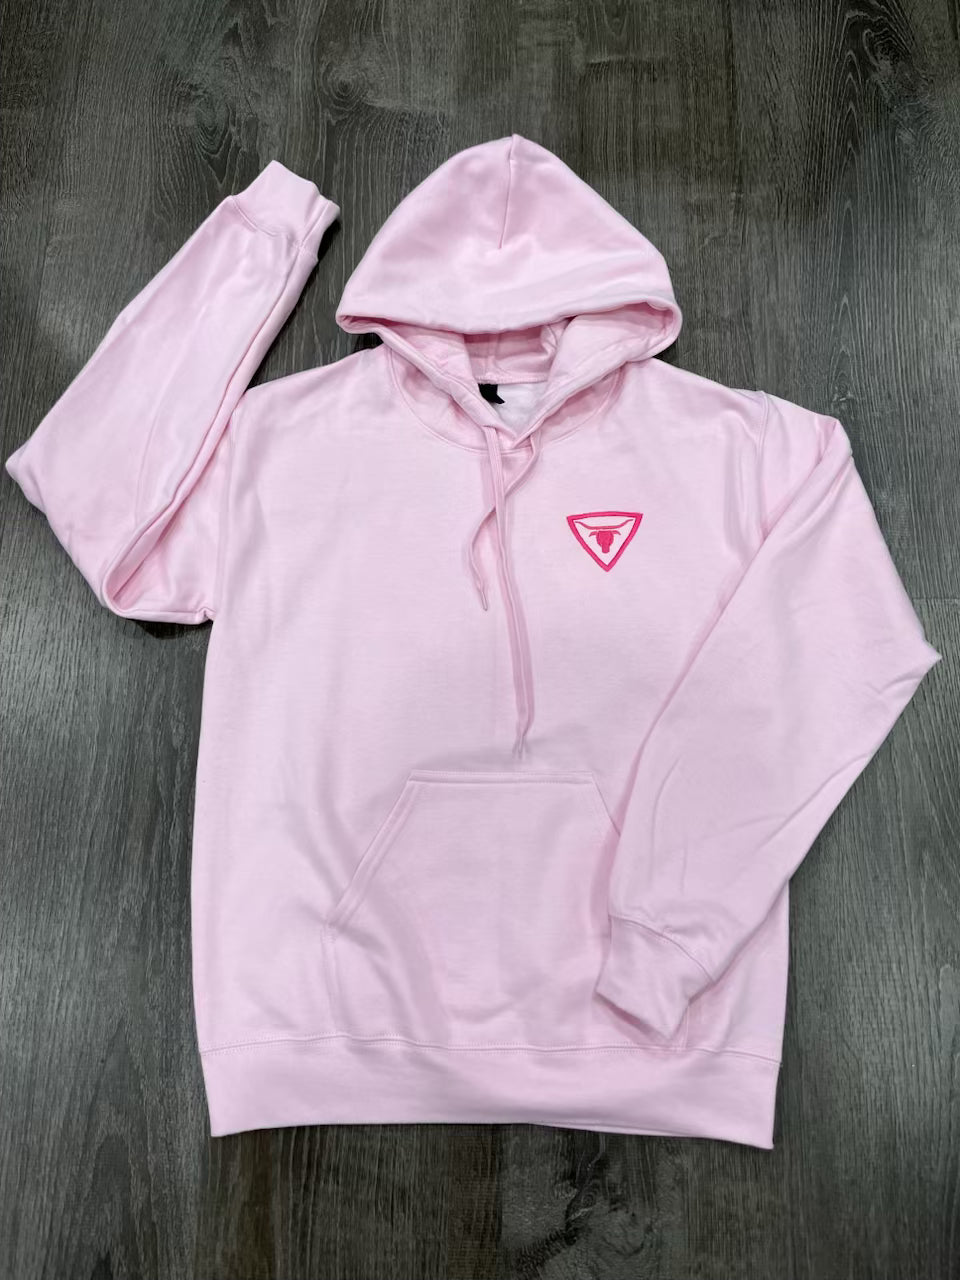 Light Pink Hoodie “Hot Pink” Embroidered